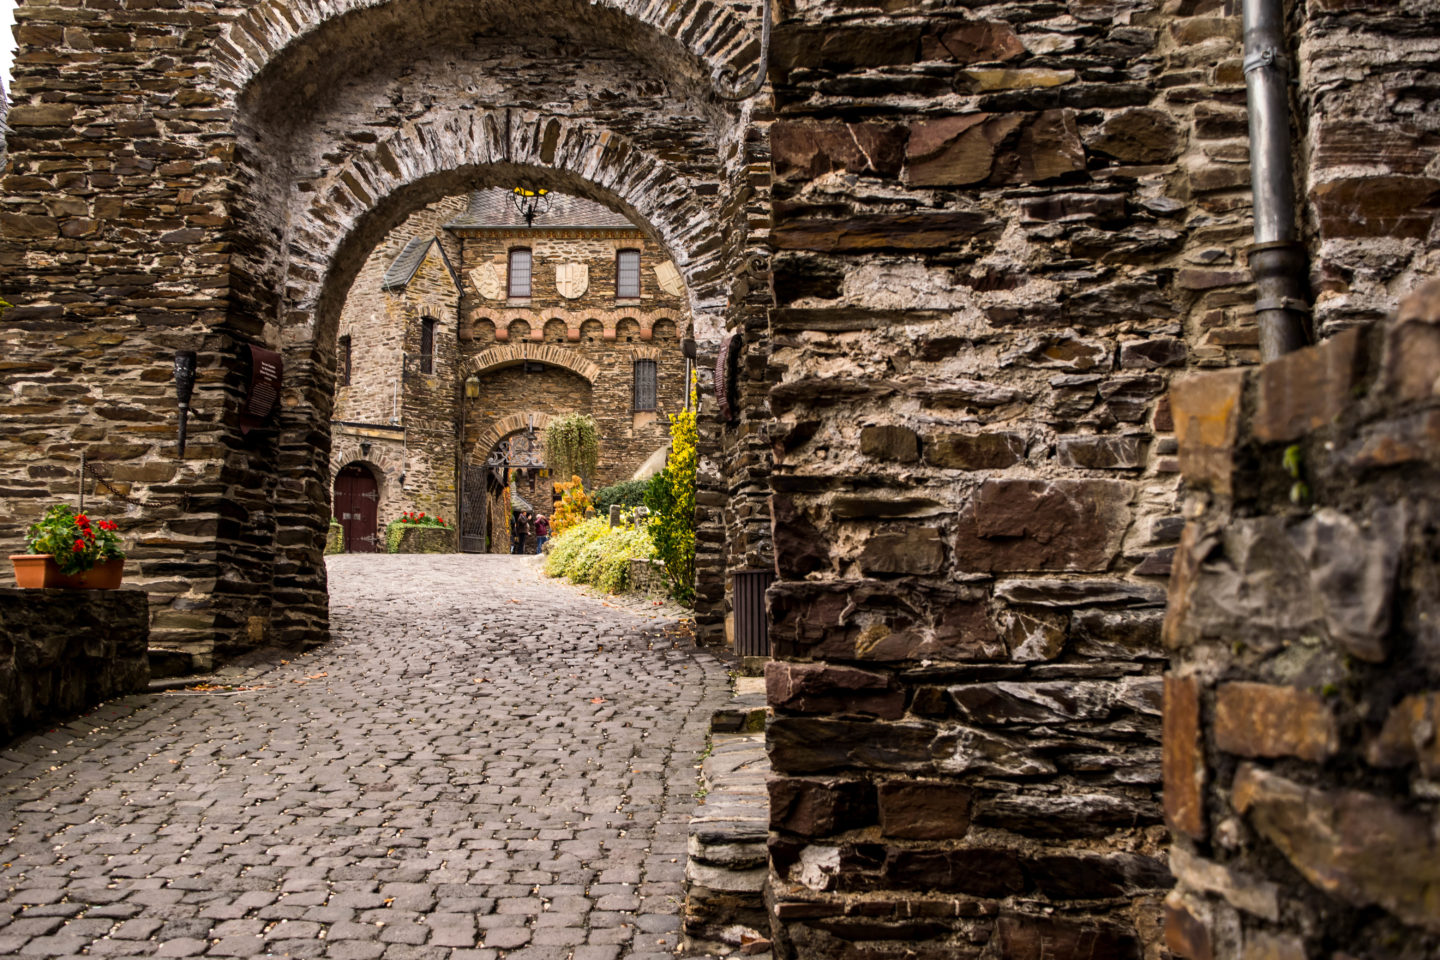 Looking through the many arches at Cochem Castle